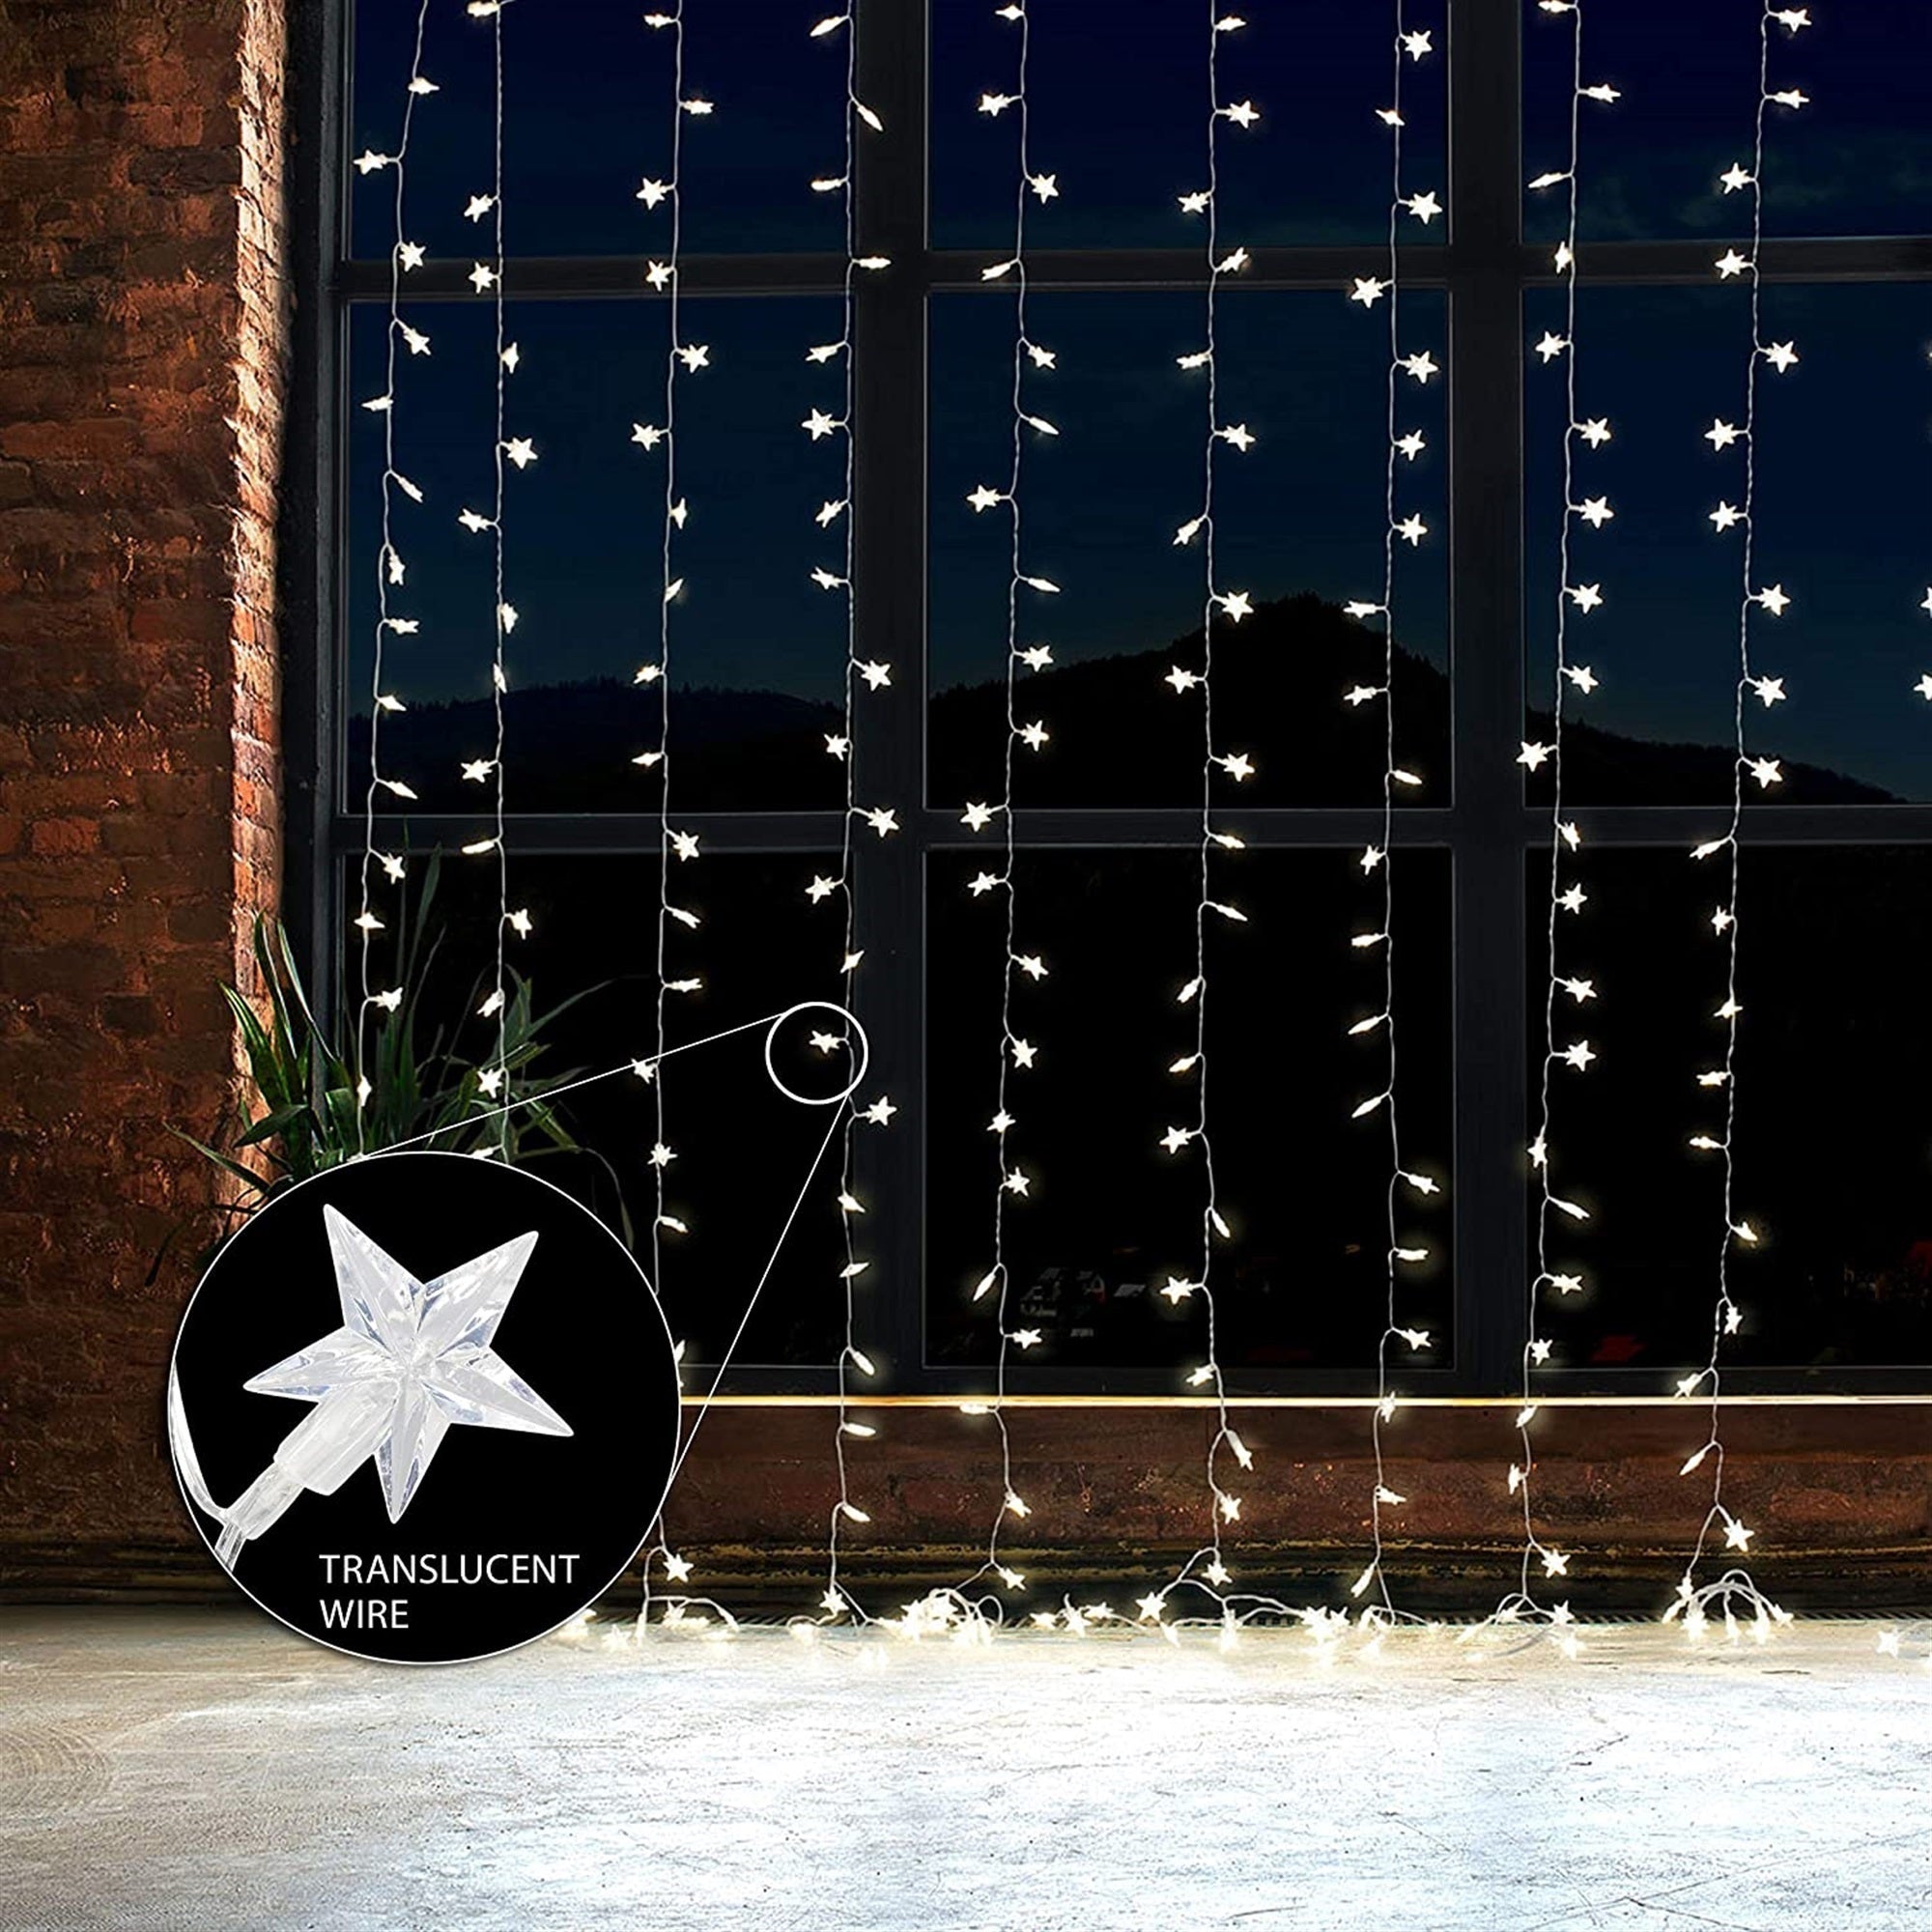 ProductWorks 8-Function String Light Curtain, 300 Clear LED Stars, 6.5 x 10